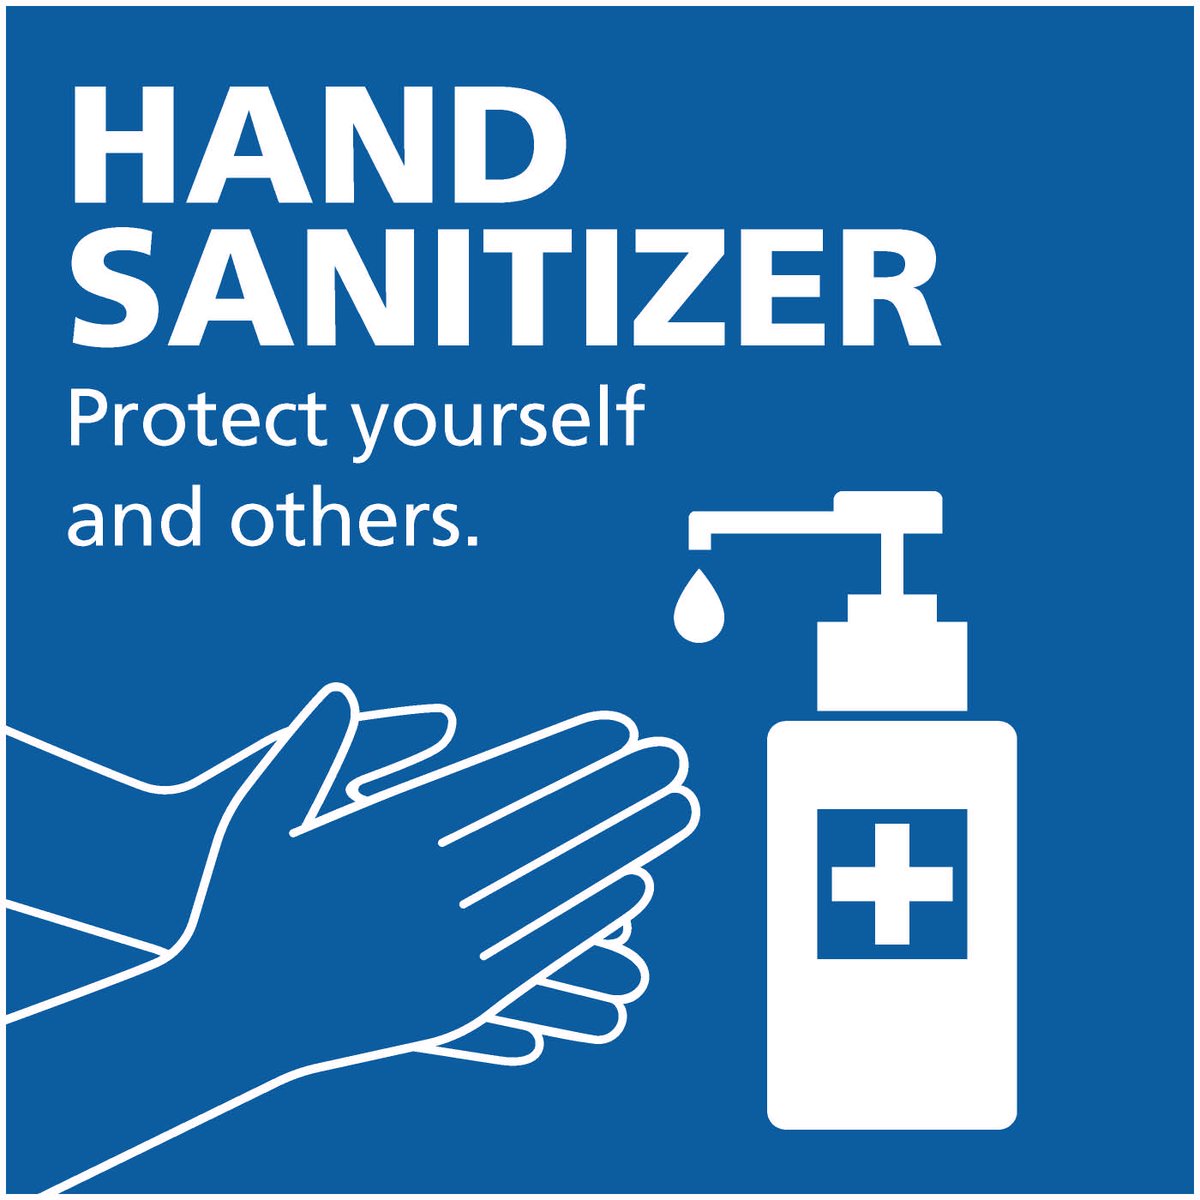  BART will continue to offer hand sanitizer at every station. We are making large signs like this one, so the dispensers are easier to find.